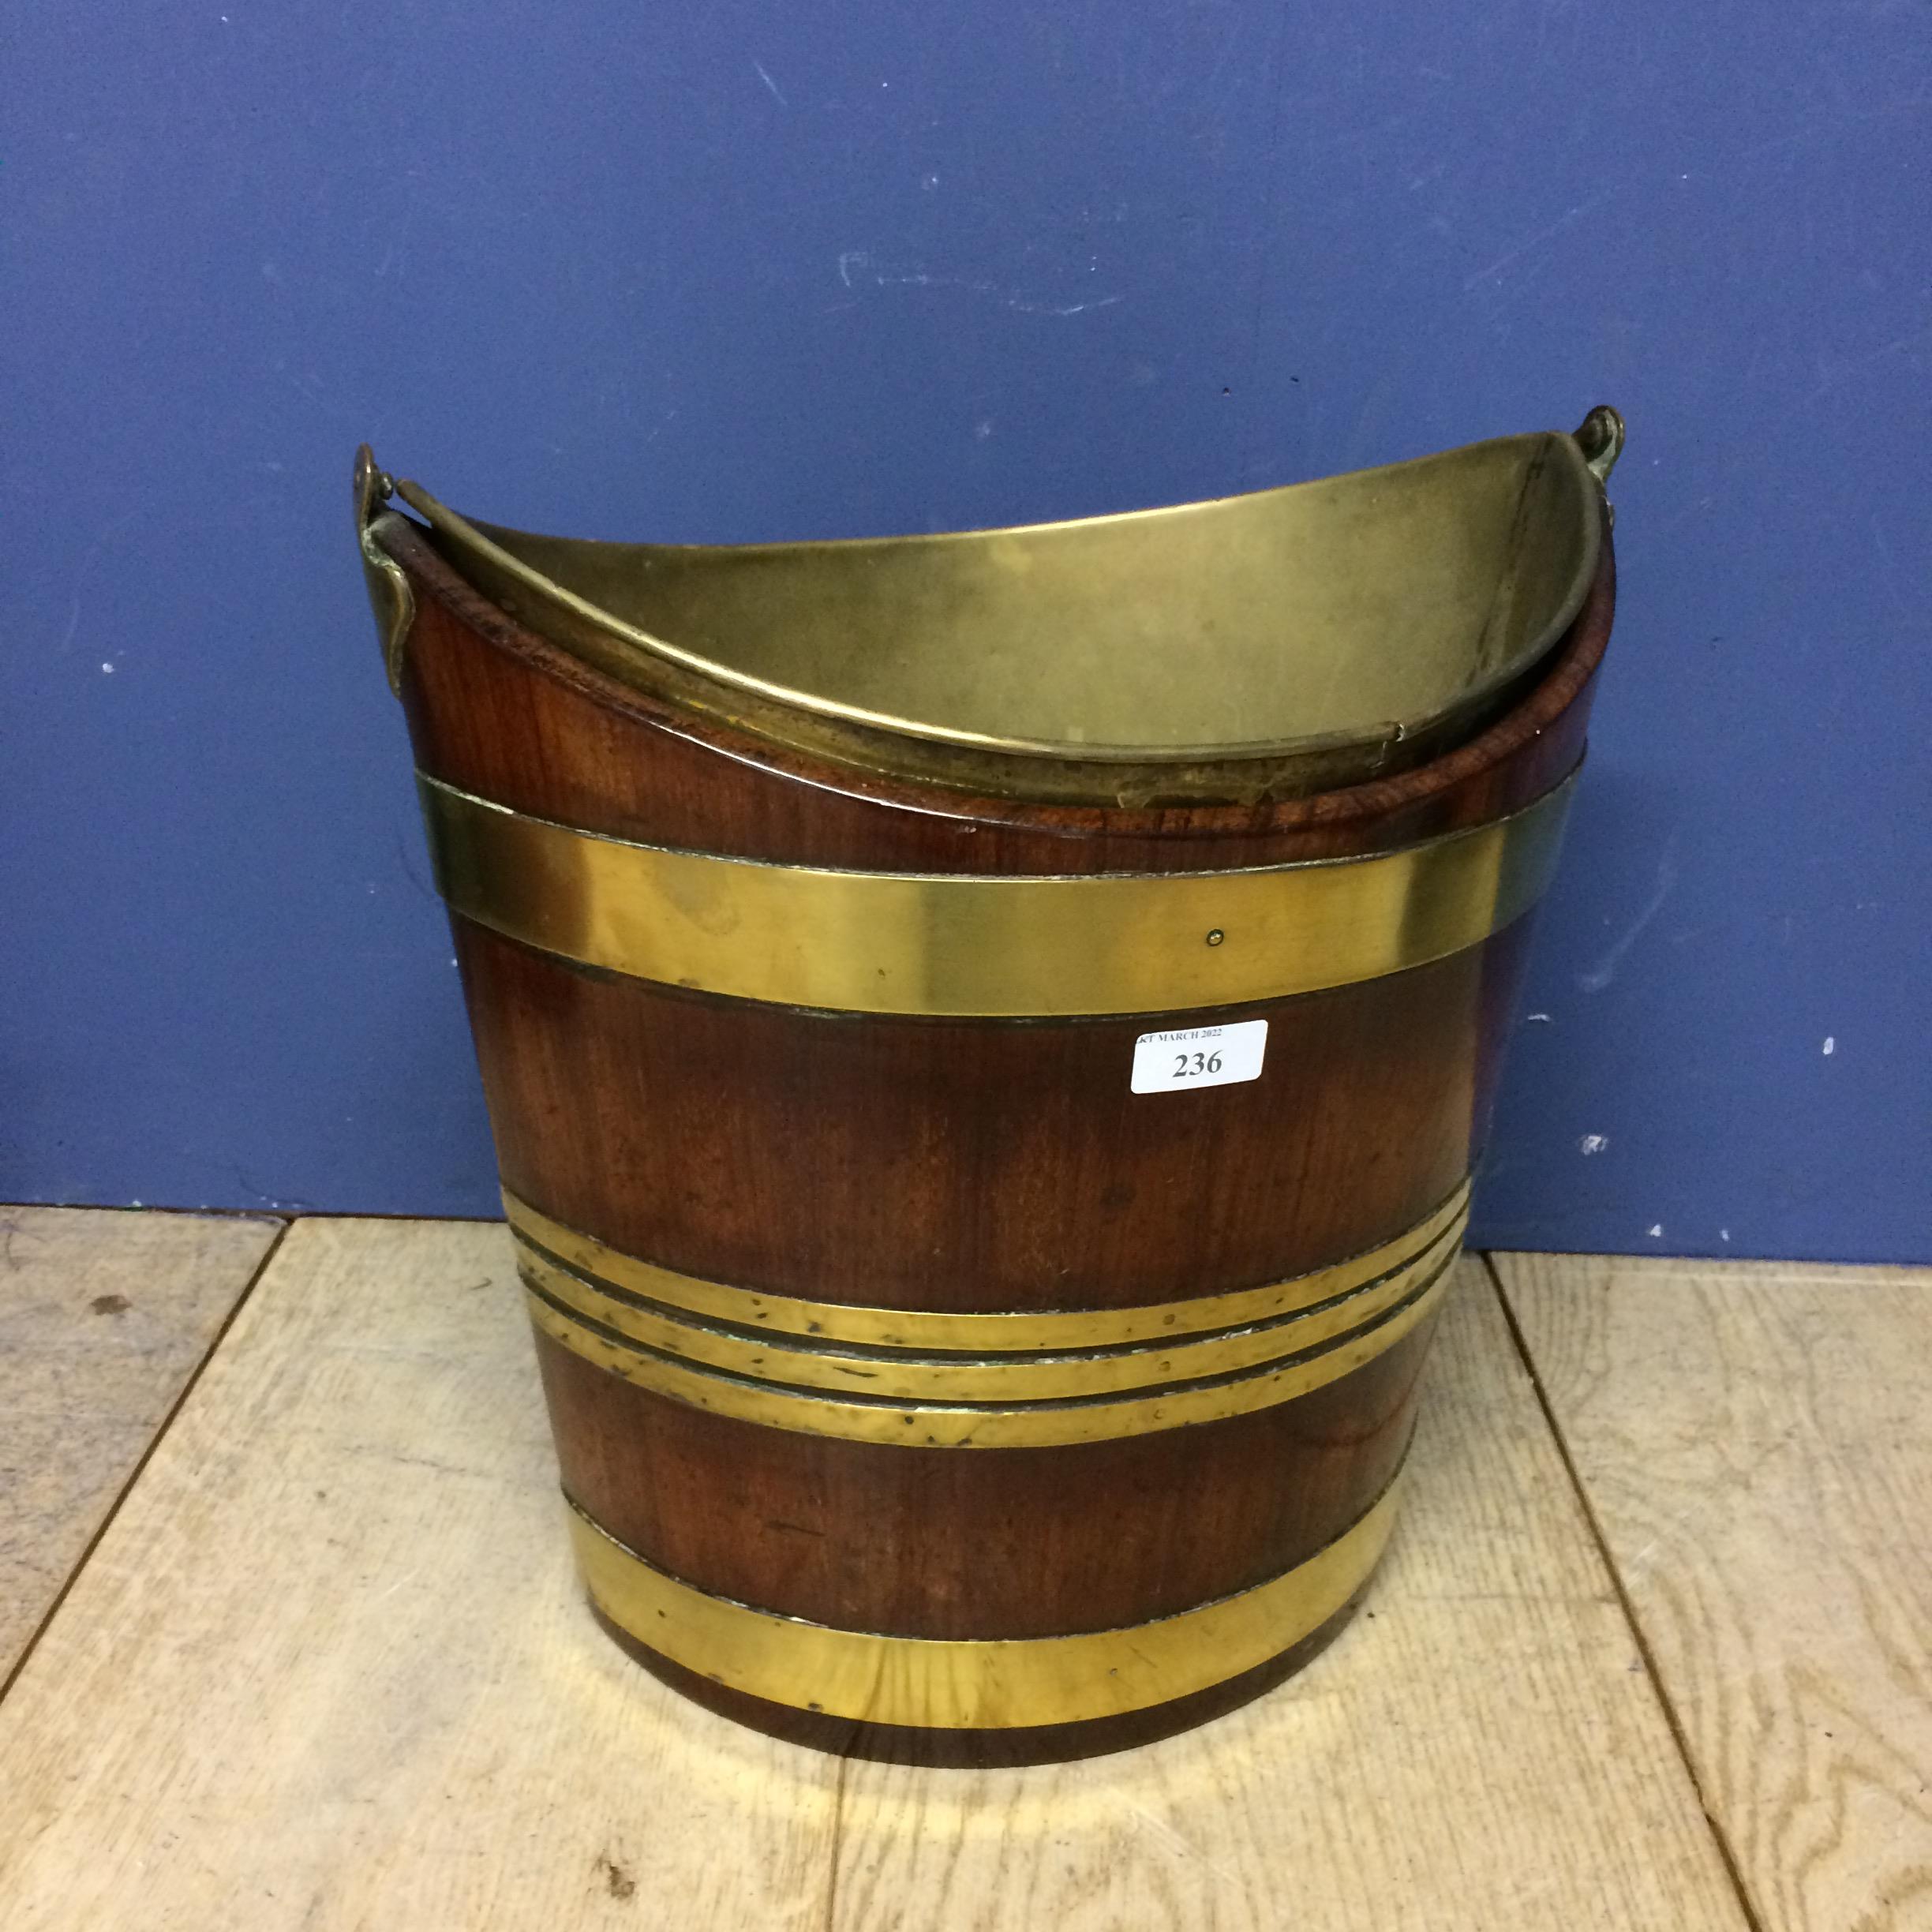 Mahogany and brass bound peat bucket with handle, and with inset brass bucket - Image 3 of 3